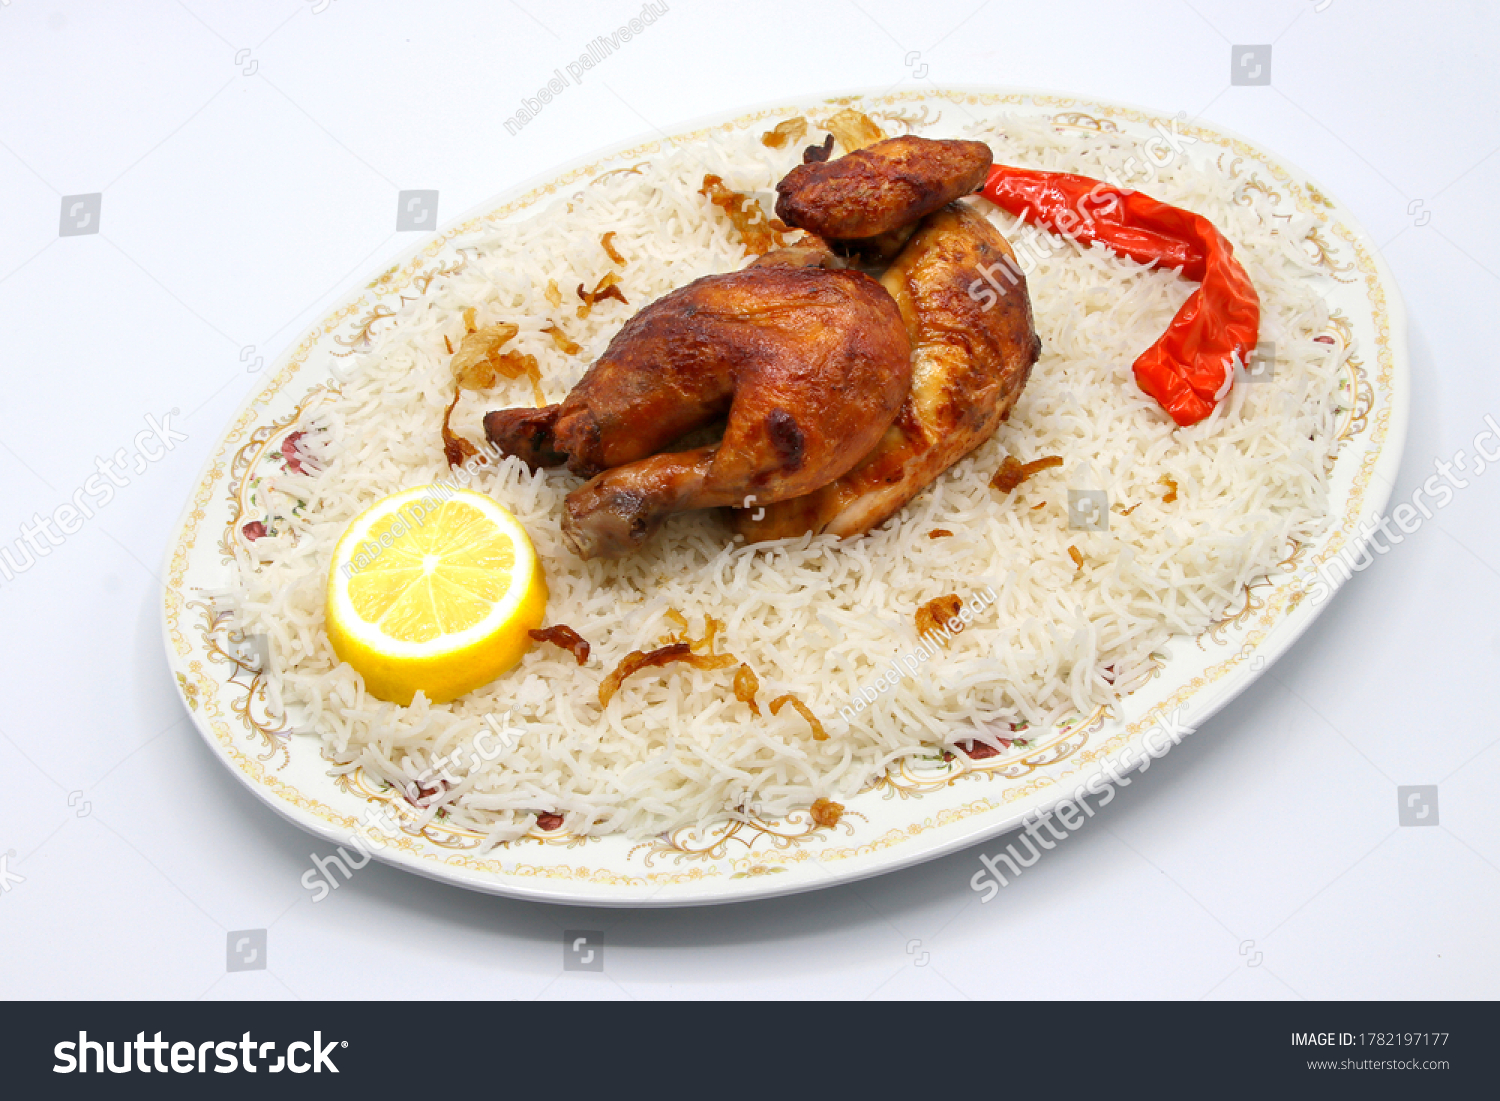 Kabsa is a mixed rice dish that originates from Saudi Arabia but is commonly regarded as a national dish in many Arab states of the Persian Gulf. The dish is made with rice and meat #1782197177